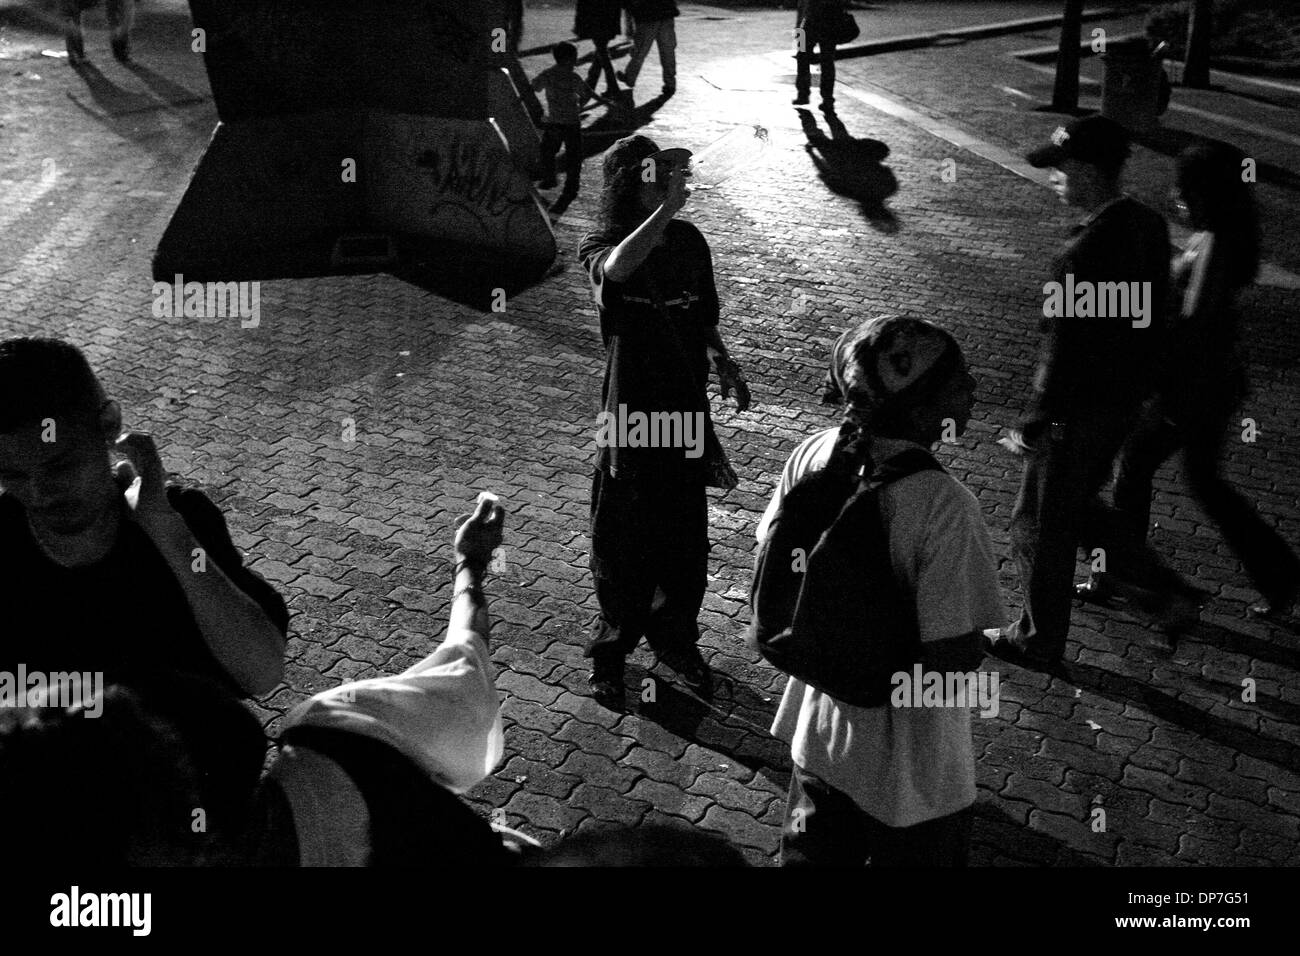 Dec. 01, 2006 - Caracas, Venezuela - Caracas youth hang out outside the Chacaito metro station and shopping area. They were drinking, dancing, and rapping. (Credit Image: © Ramin Rahimian/zReportage.com/ZUMA) Stock Photo